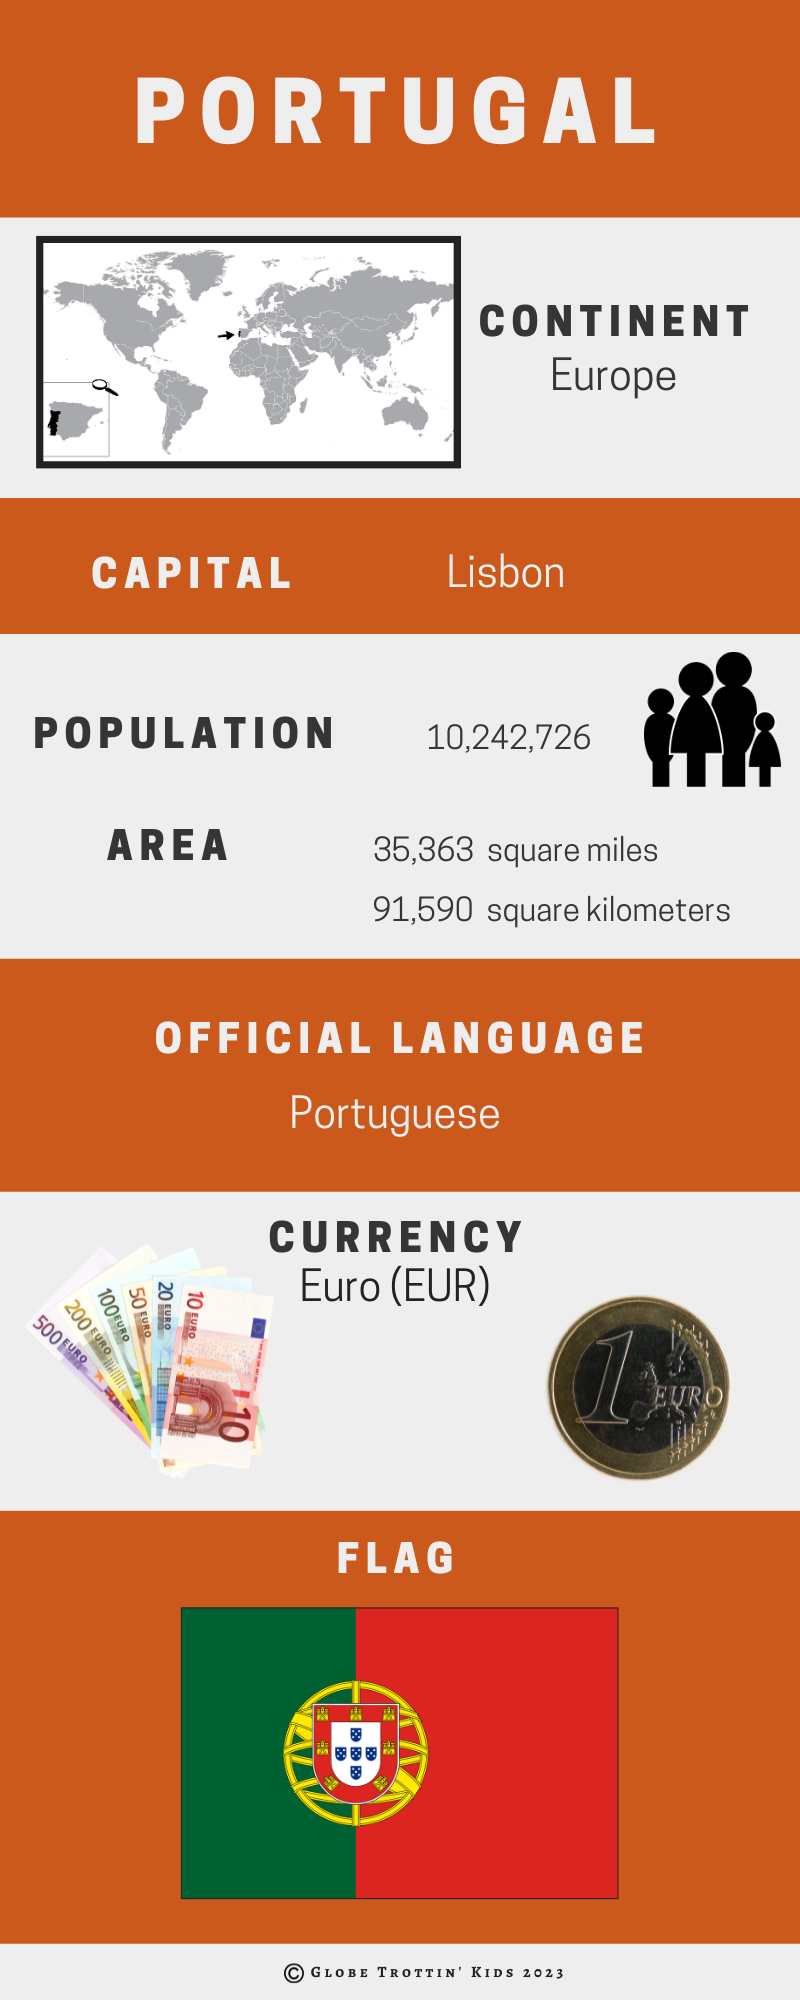 Portugal-infographic